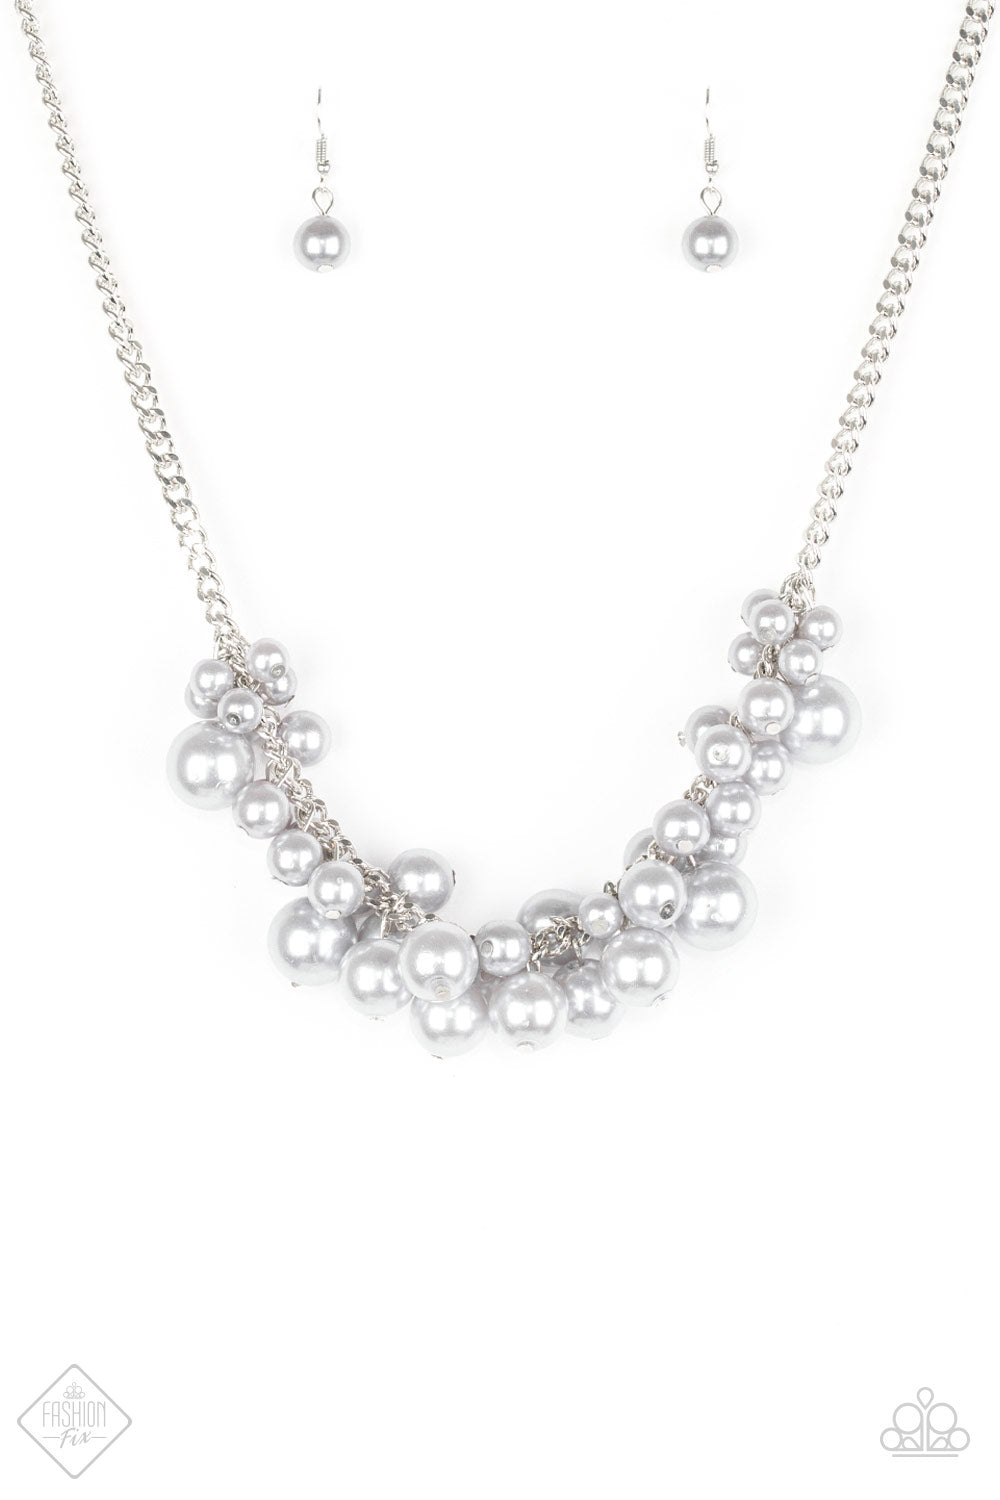 Glam Queen - Paparazzi Silver Necklace - Be Adored Jewelry